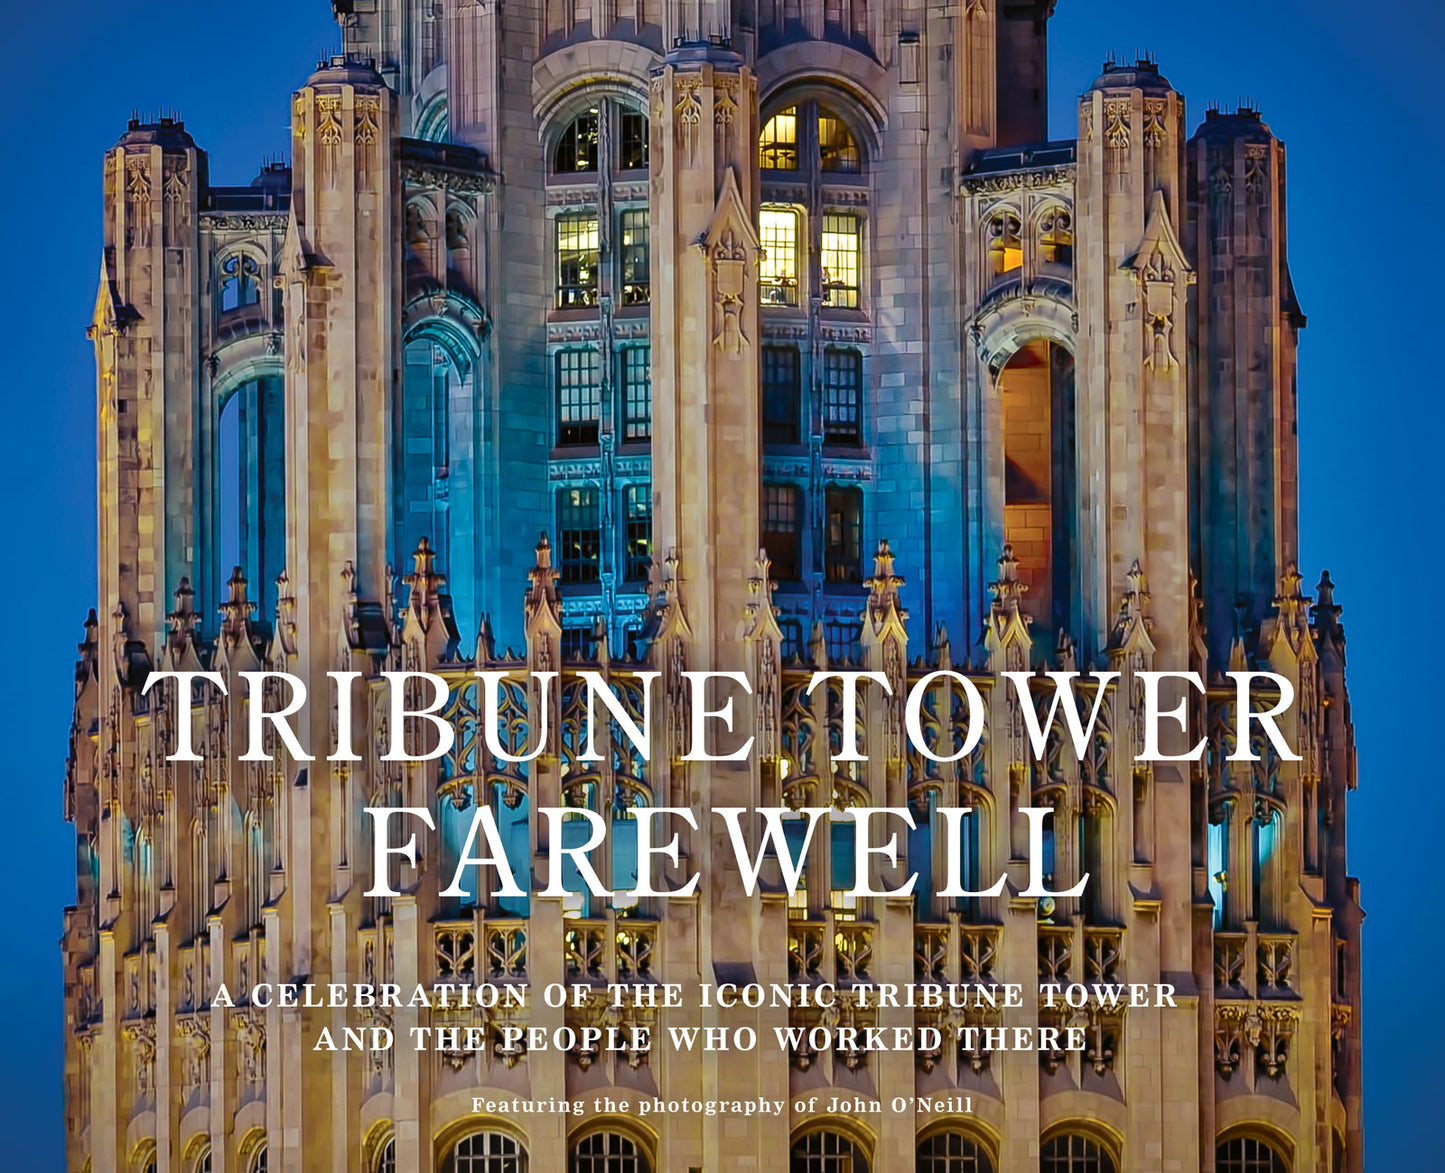 Tribune Tower Farewell, a Celebration of the Iconic Tribune Tower and the People Who Worked There, featuring the photography of John O'Neill.